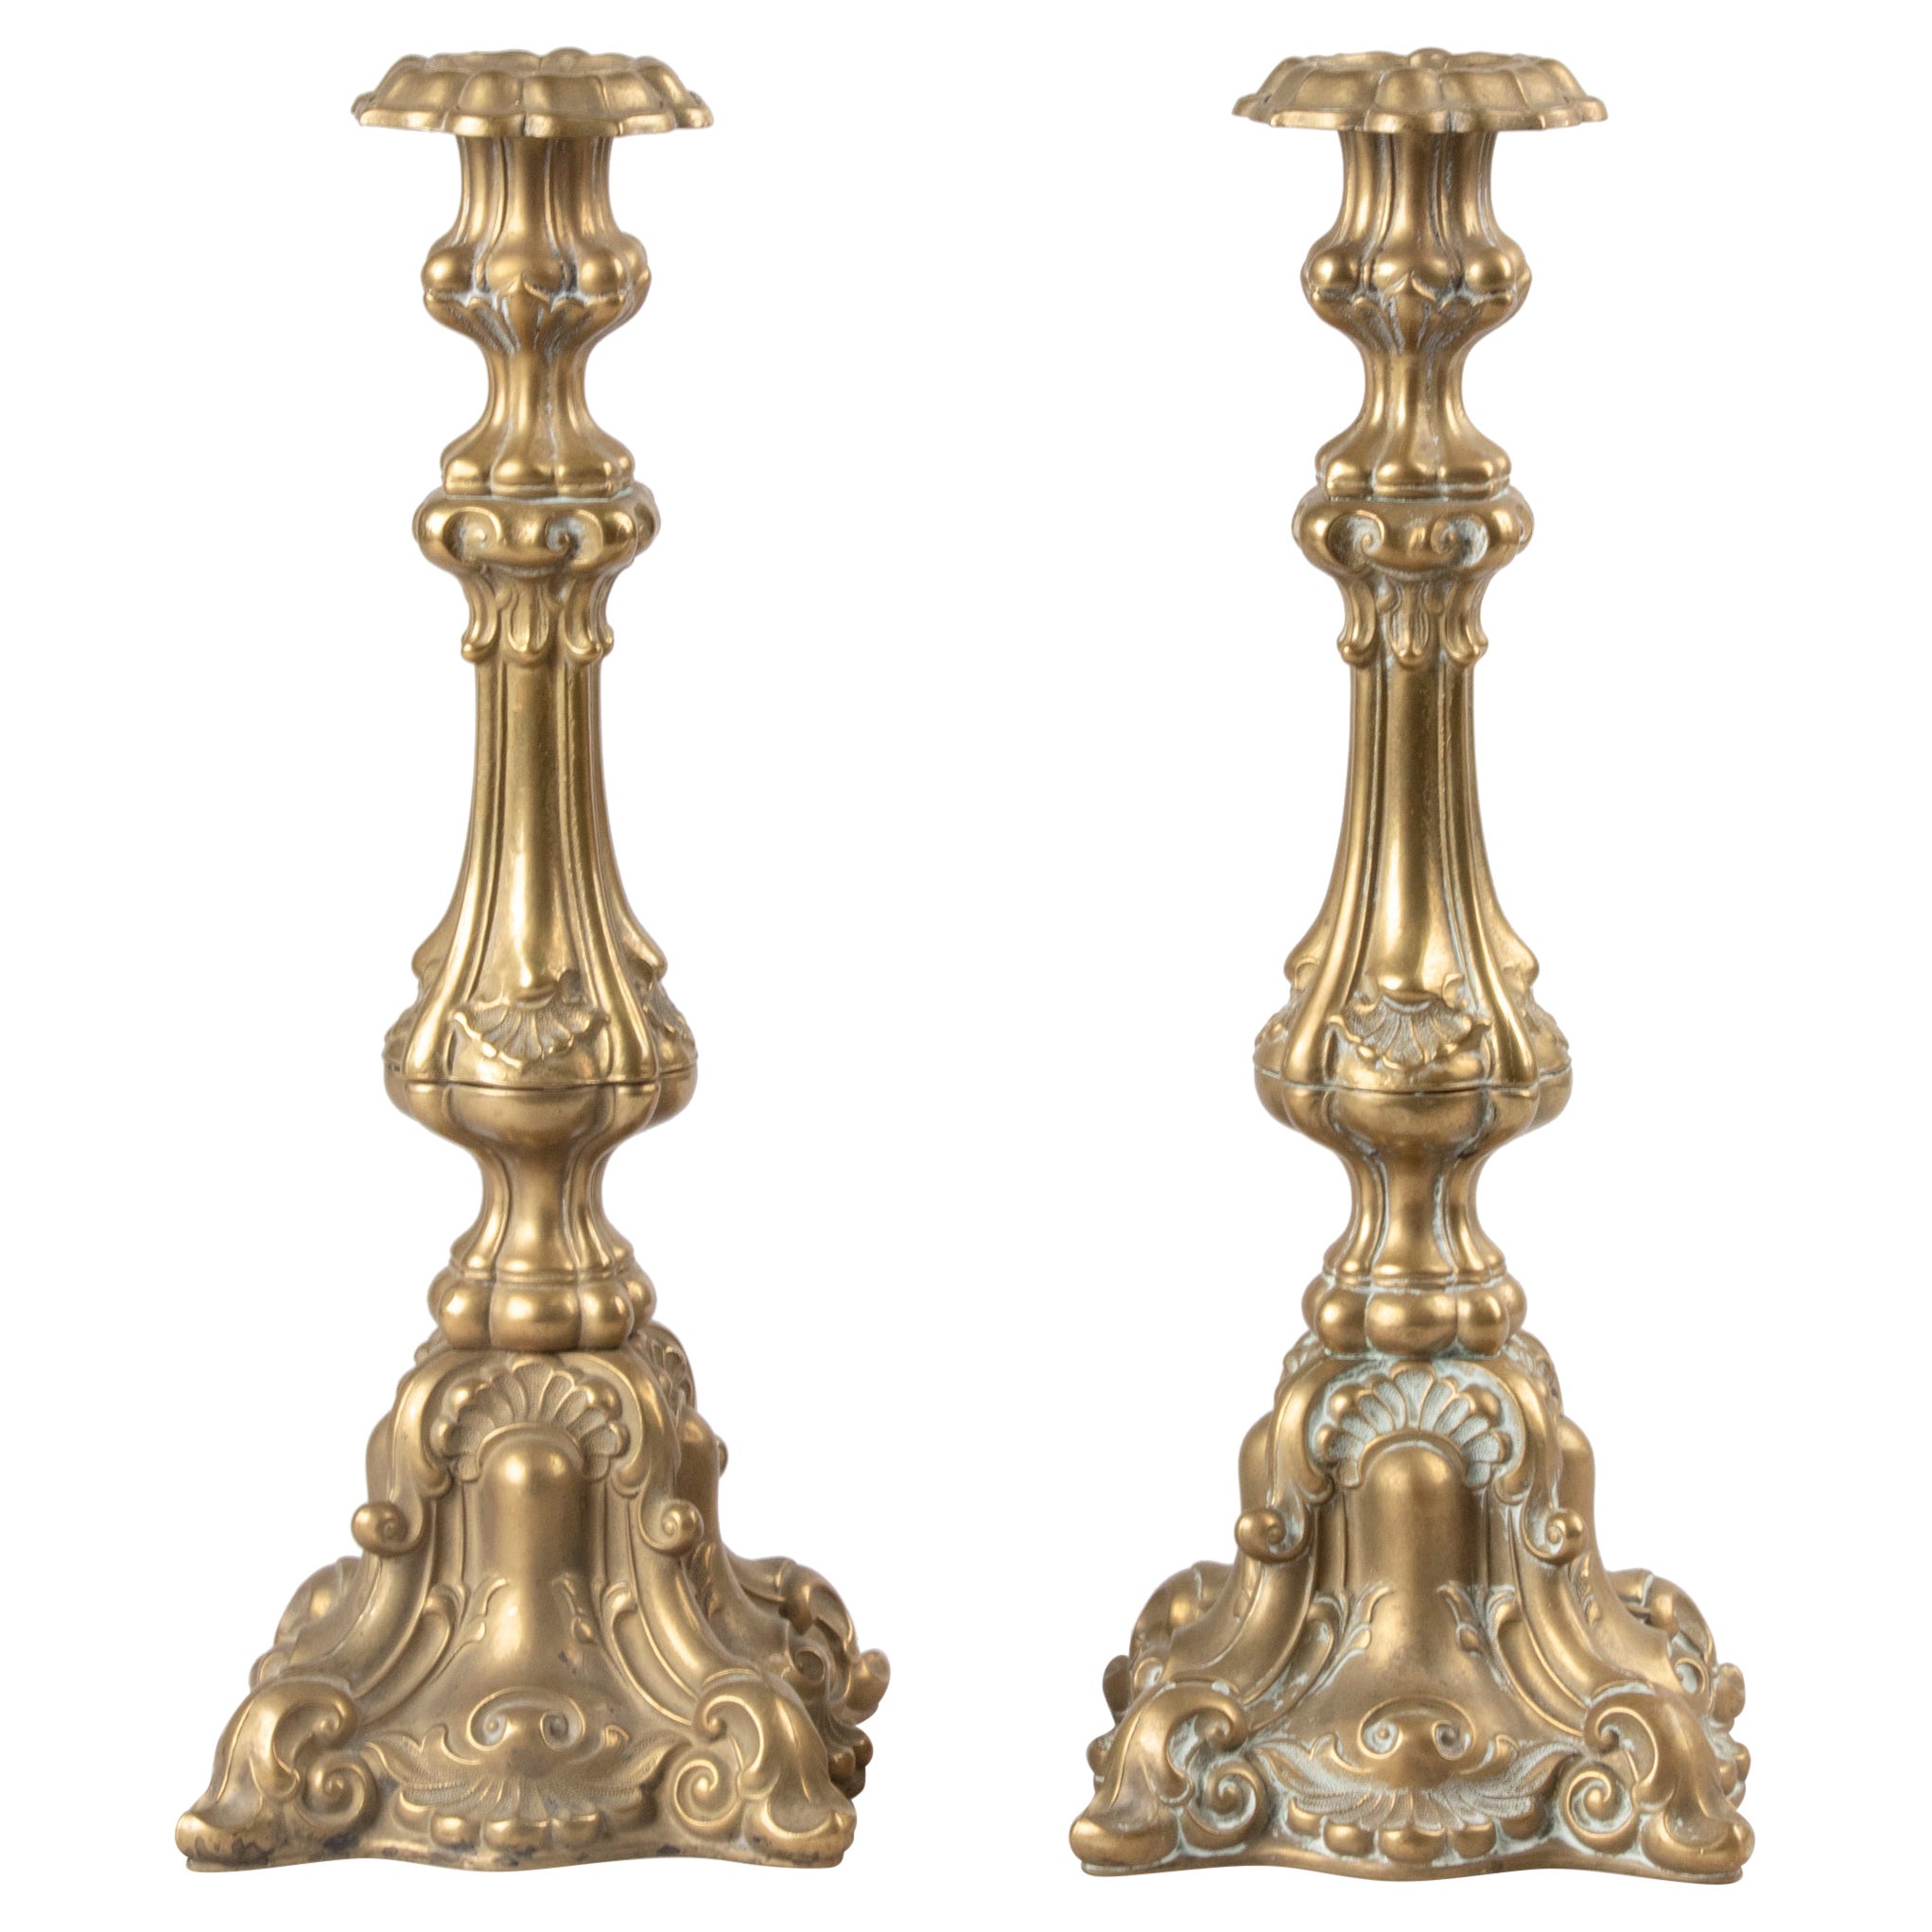 Early 20th Century Baroques Style Brass Candlesticks